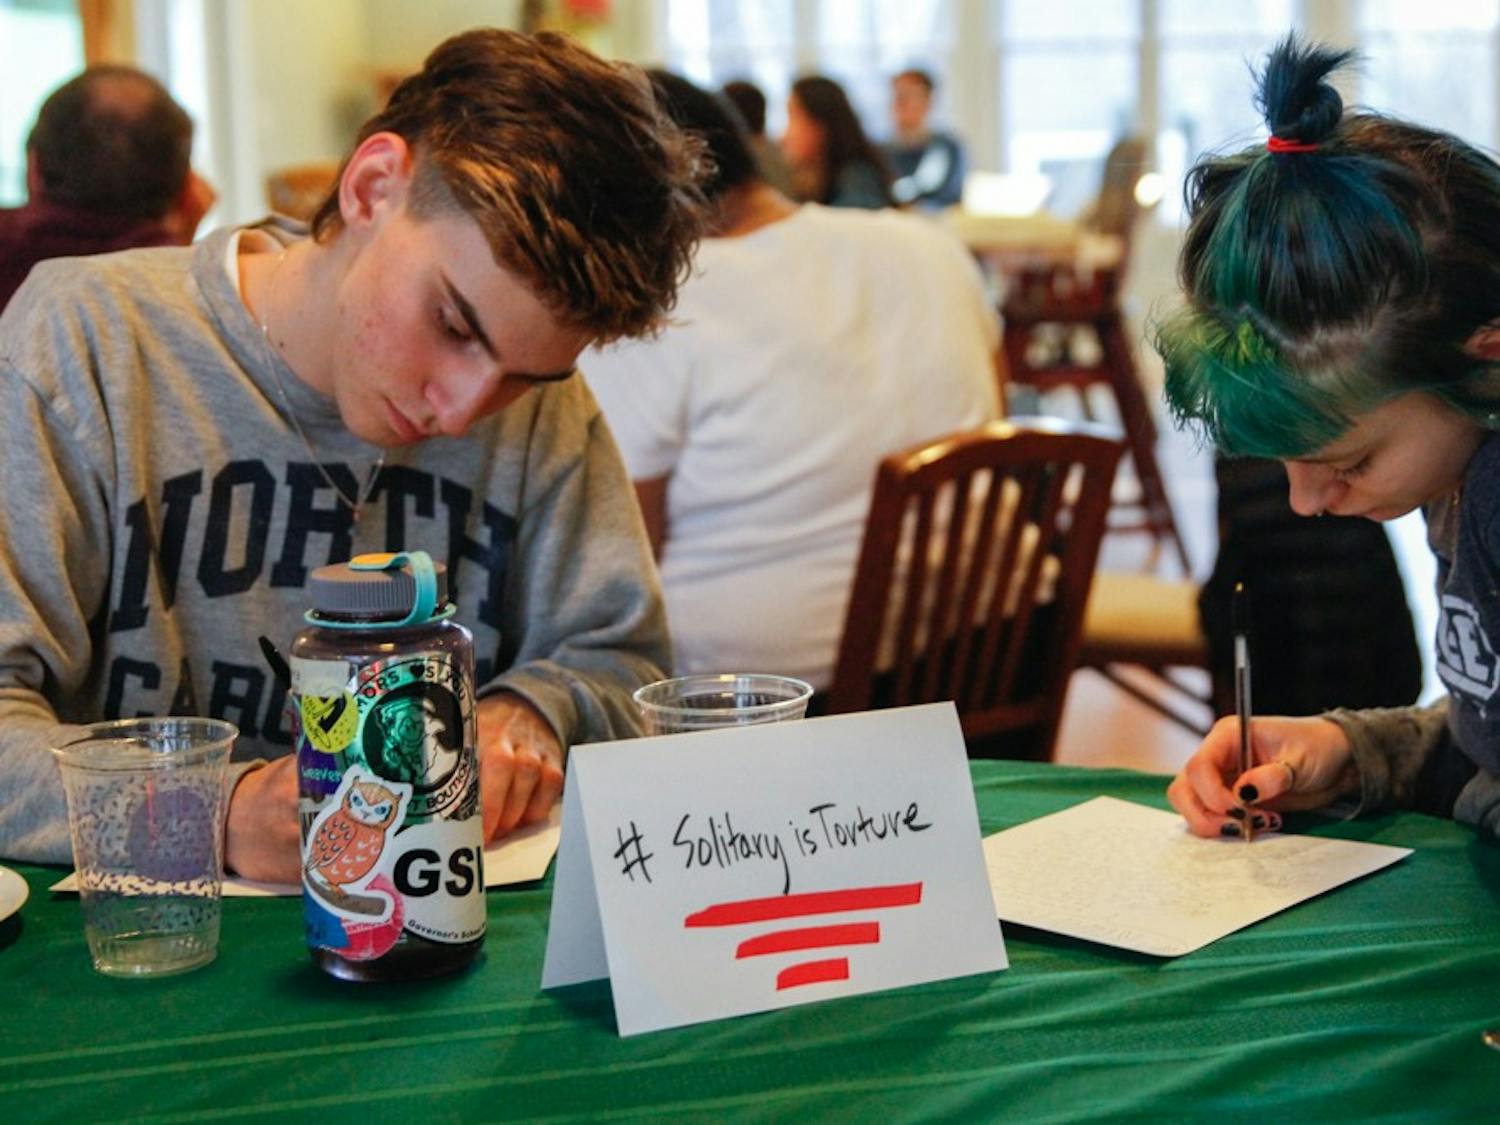 (From left to right) Sergio Jimanez, senior at Chapel Hill High School and Jasper Cobb, senior at Middle College High School at Durham Technical Community College, write letters to  Kanautica Zayre-Brown at the Queer Family Gathering dinner at a community building in Carrboro, Tuesday, March 19, 2019. Kanautica is a trans woman incarcerated at a men's prison and who has been in solitary confinement for 17 days. The letters are meant to help Kanautica maintain her mental health during her confinement until she can be moved into a women's facility.